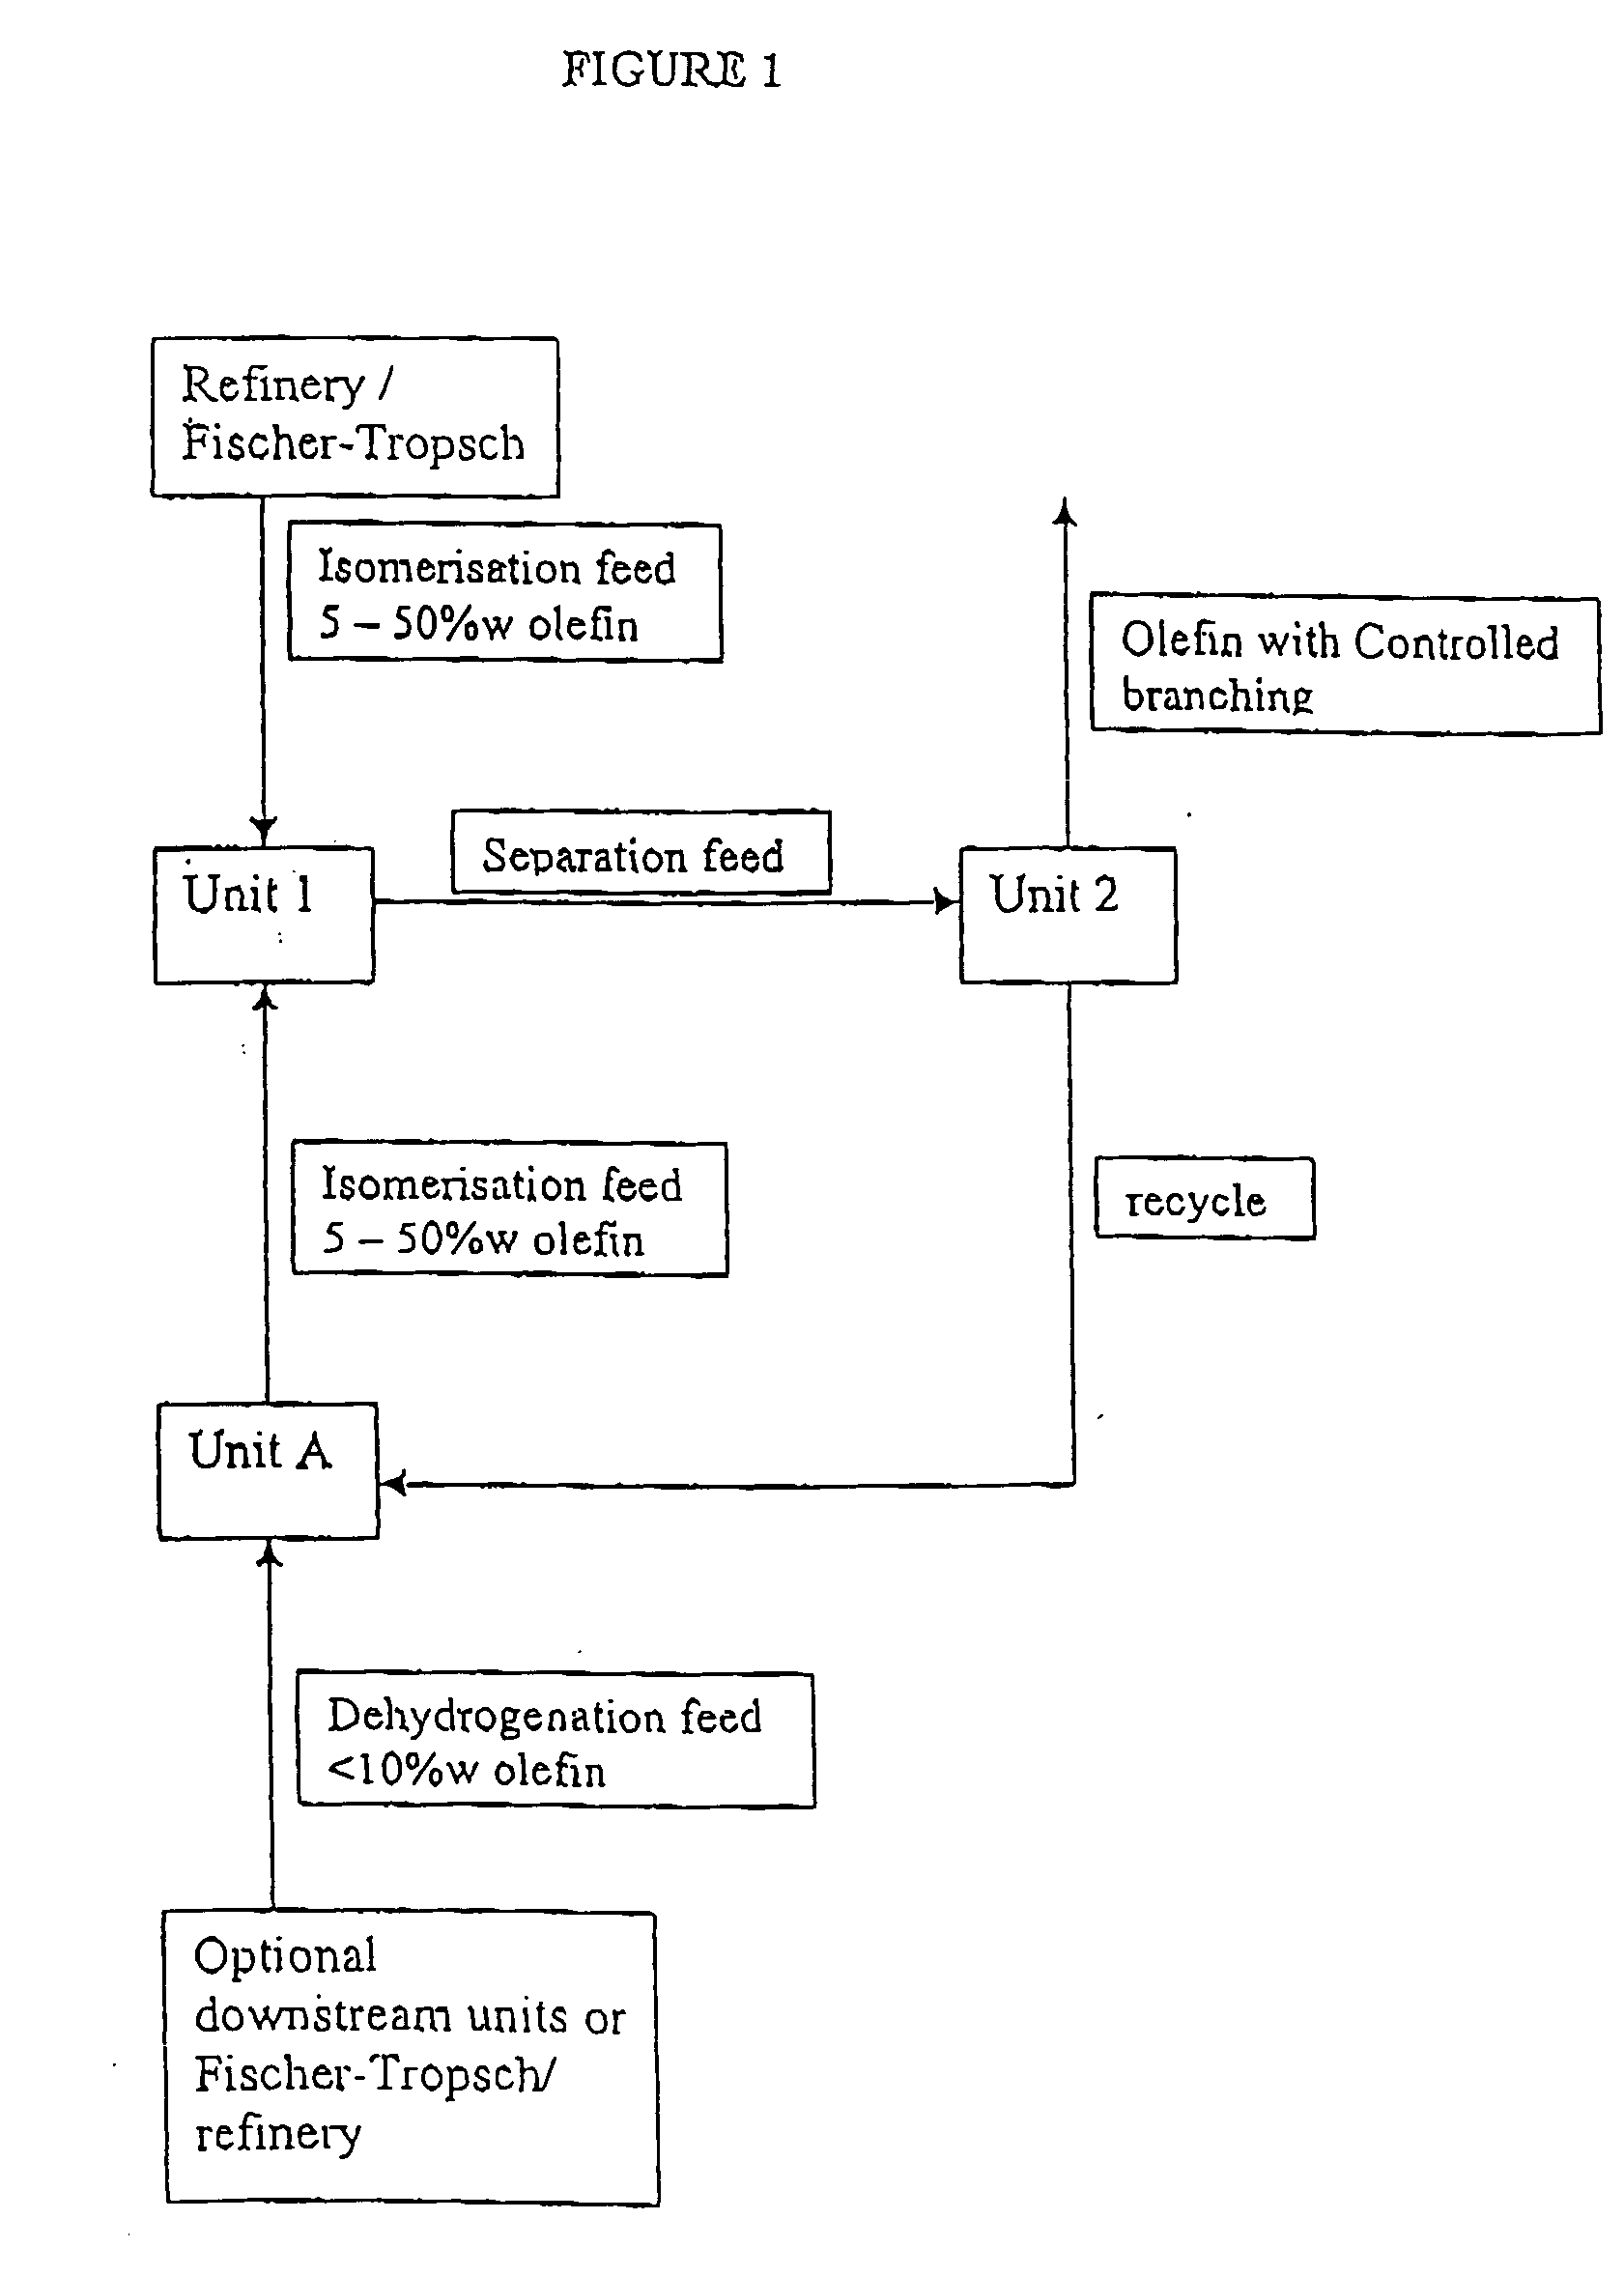 Process for producing branched olefins from linear olefin/paraffin feed